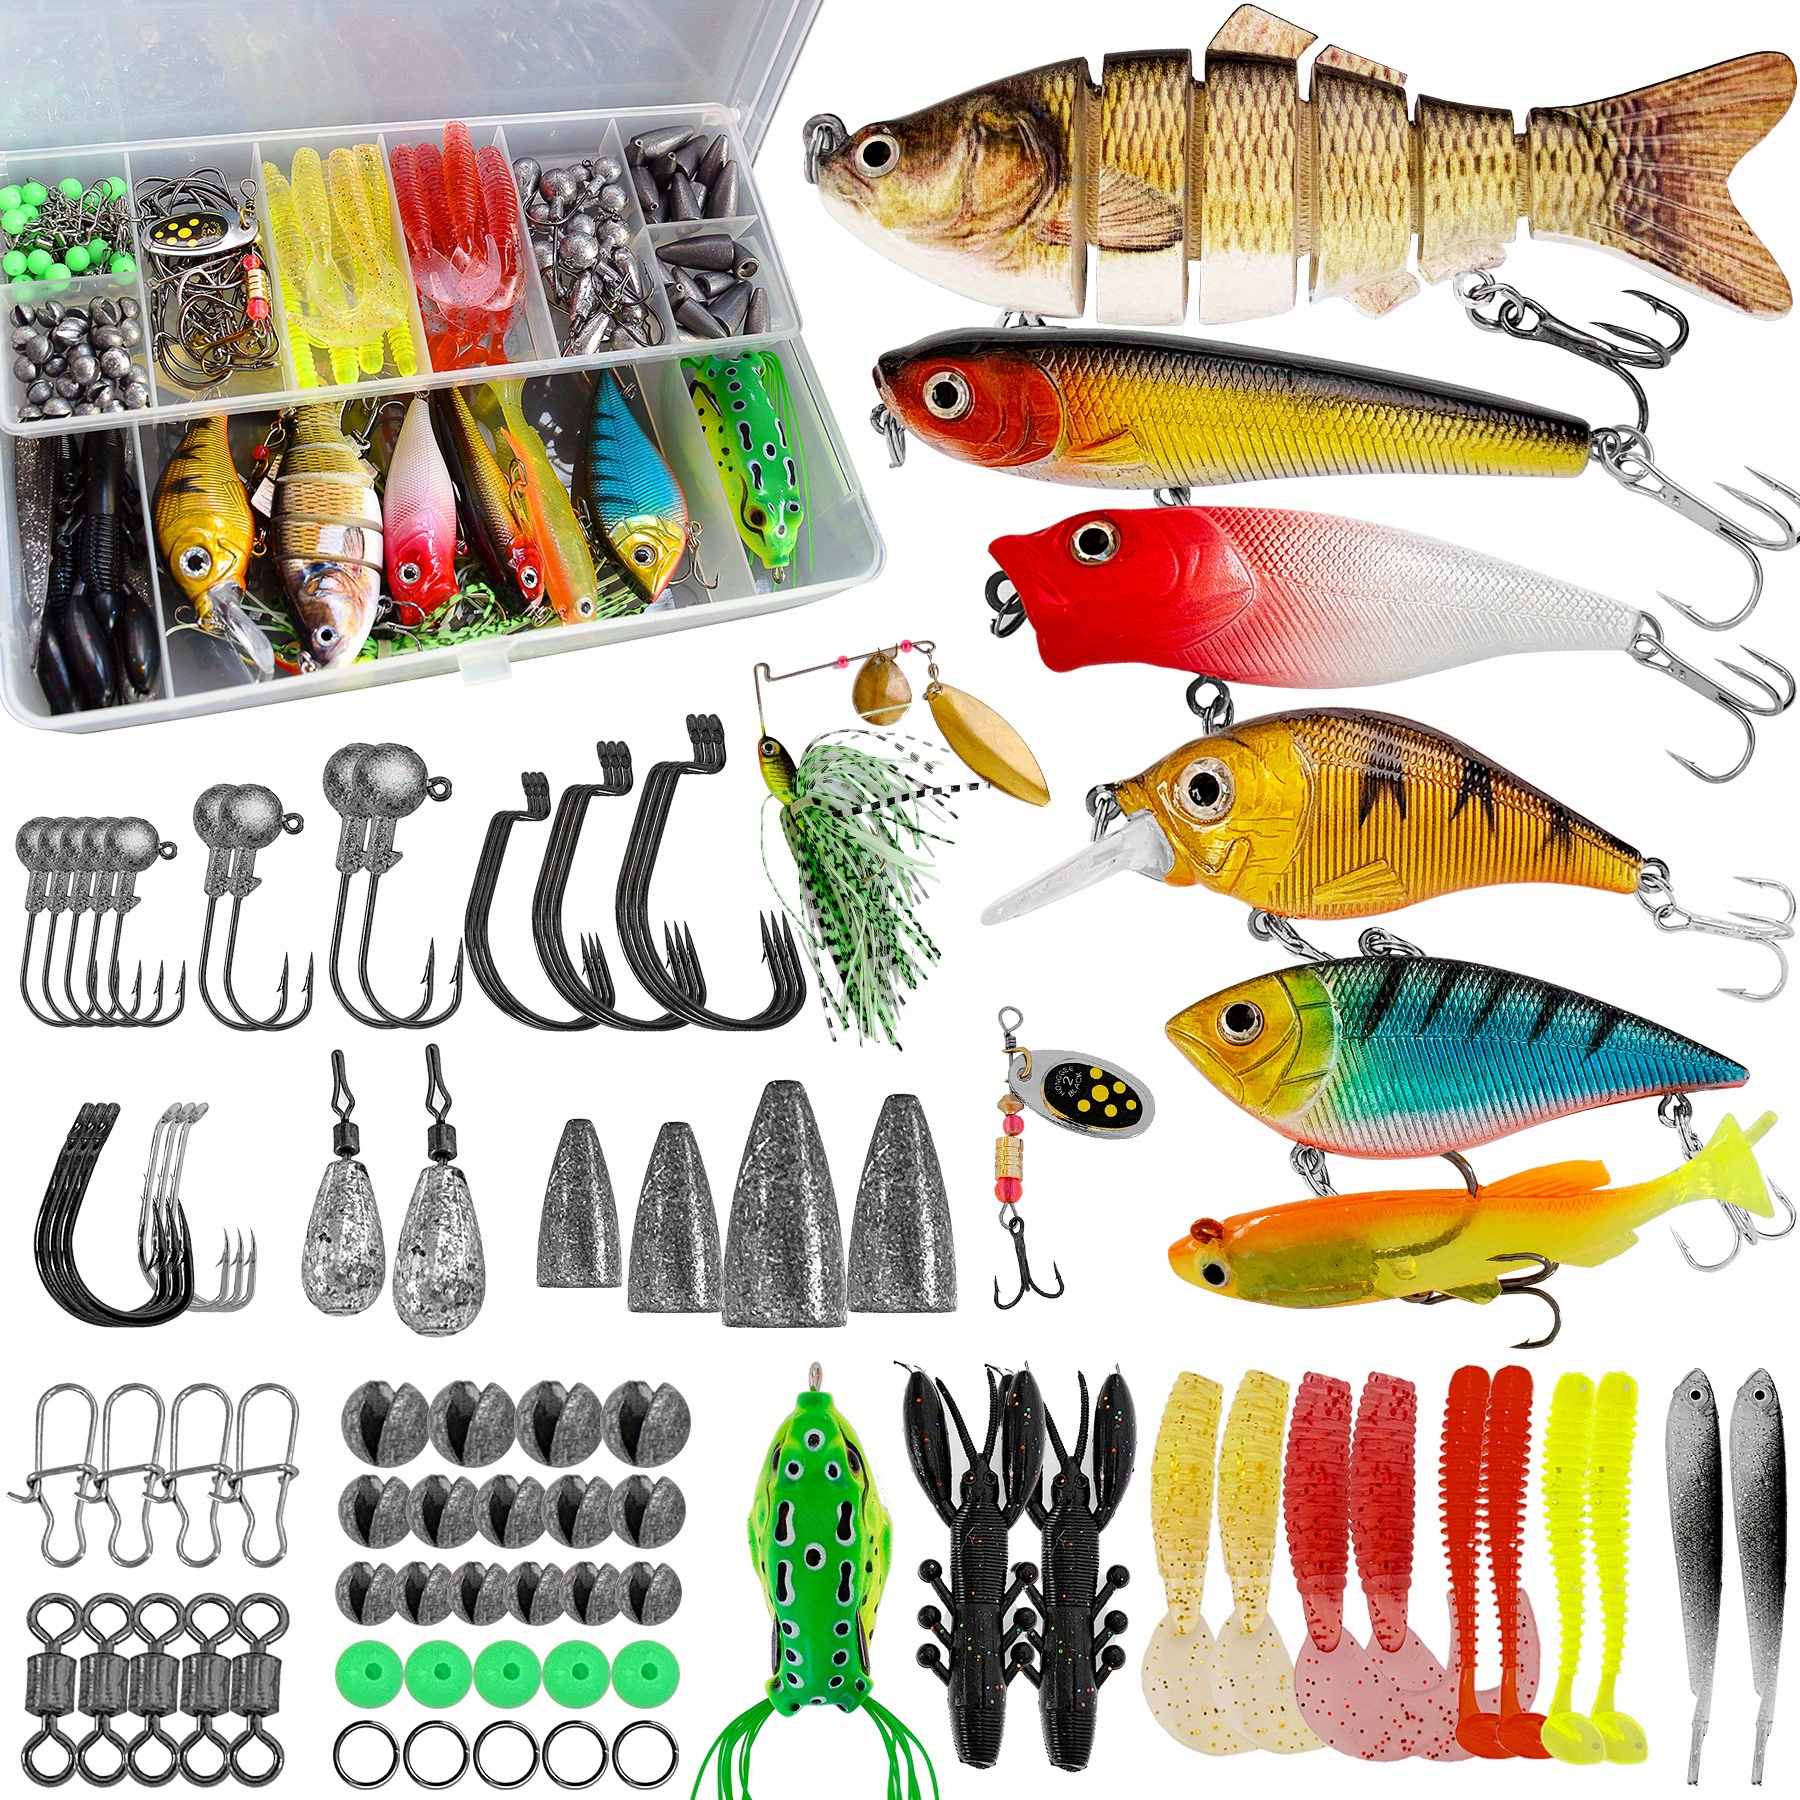 Akuna Bulk Pack 100+ Fishing Lures crankbaits Spoons and spinnerbaits Pack